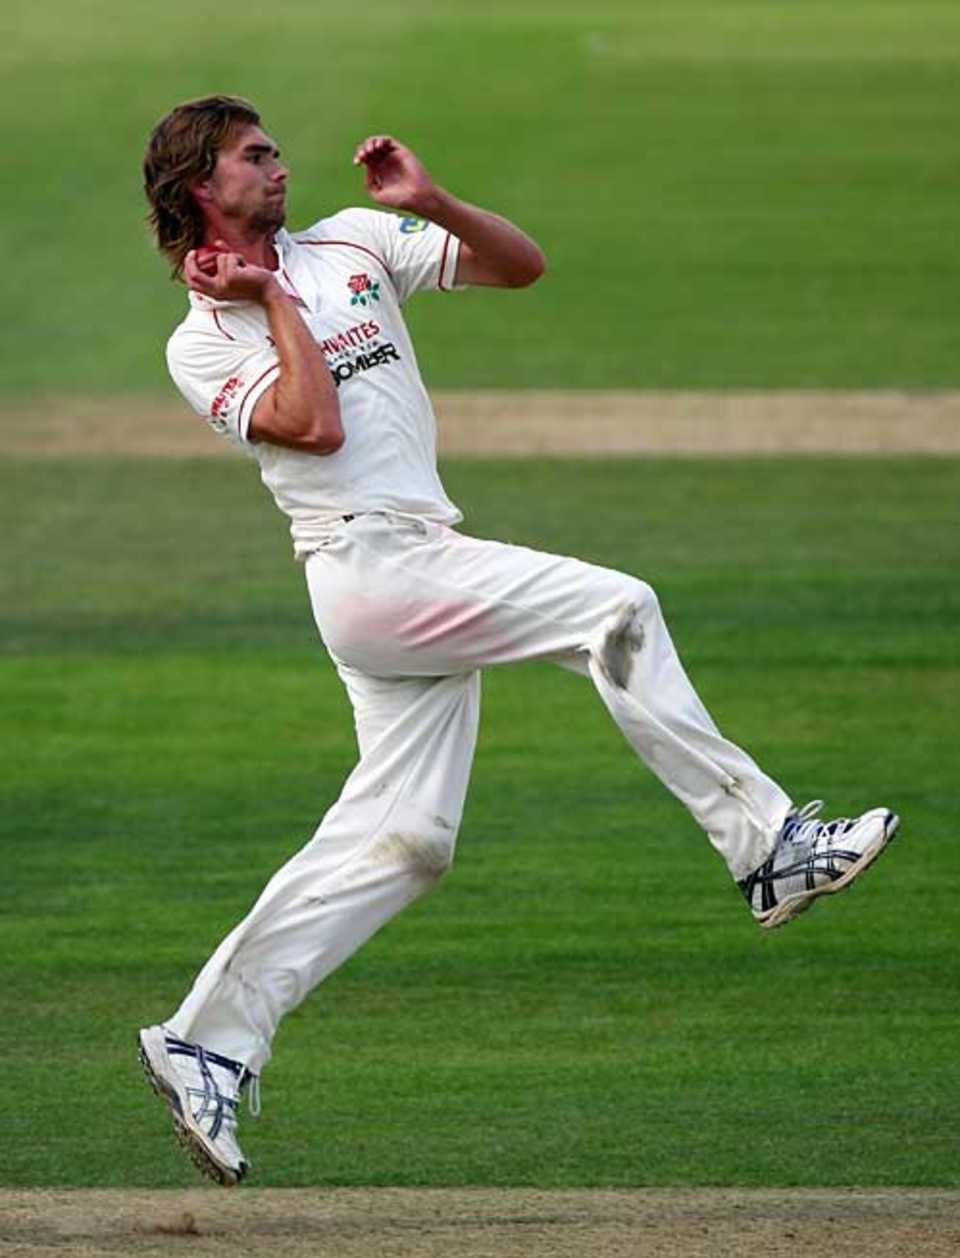 Oliver Newby helped restrict Hampshire with four wickets